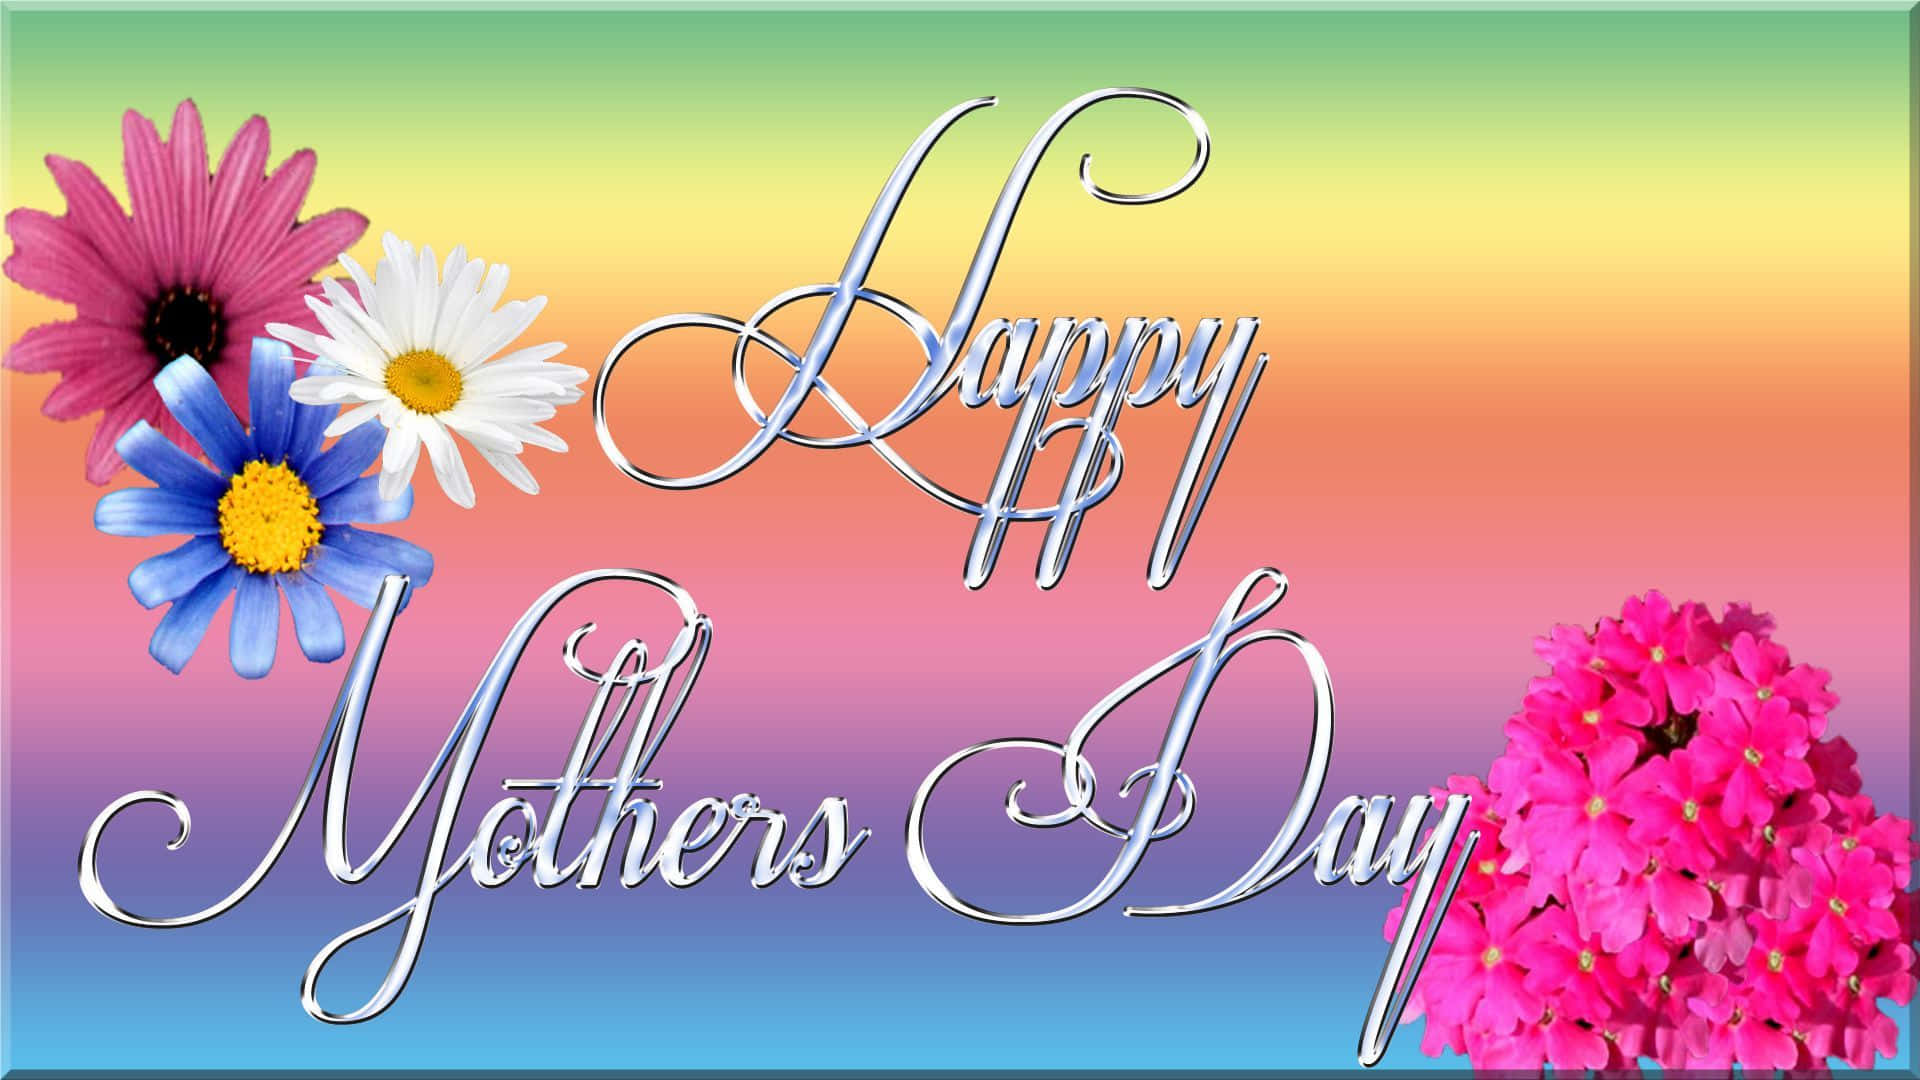 Celebrate Mother's Day with love and care!